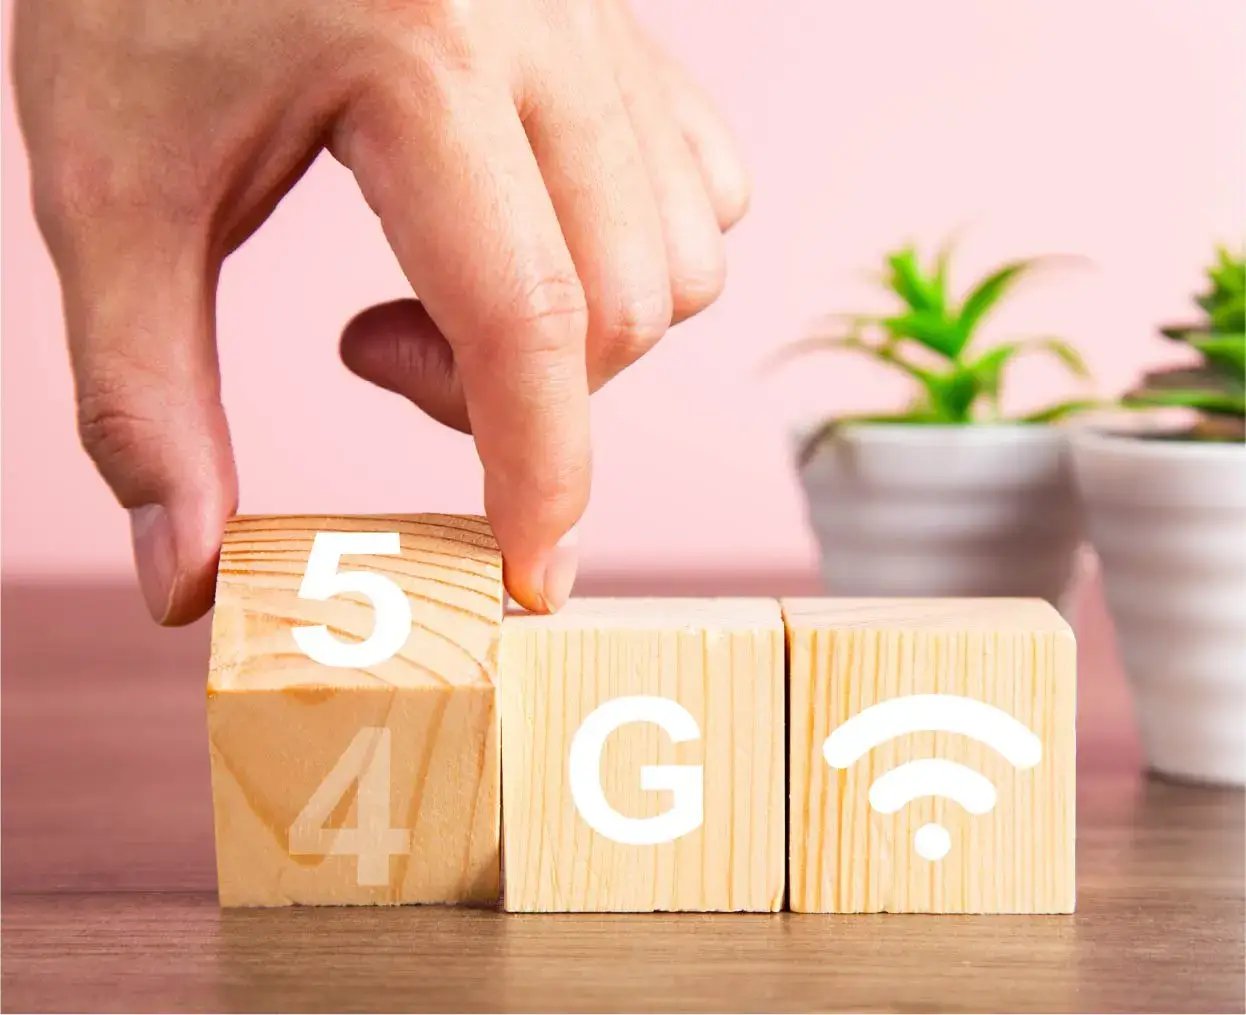 5g in hospitality